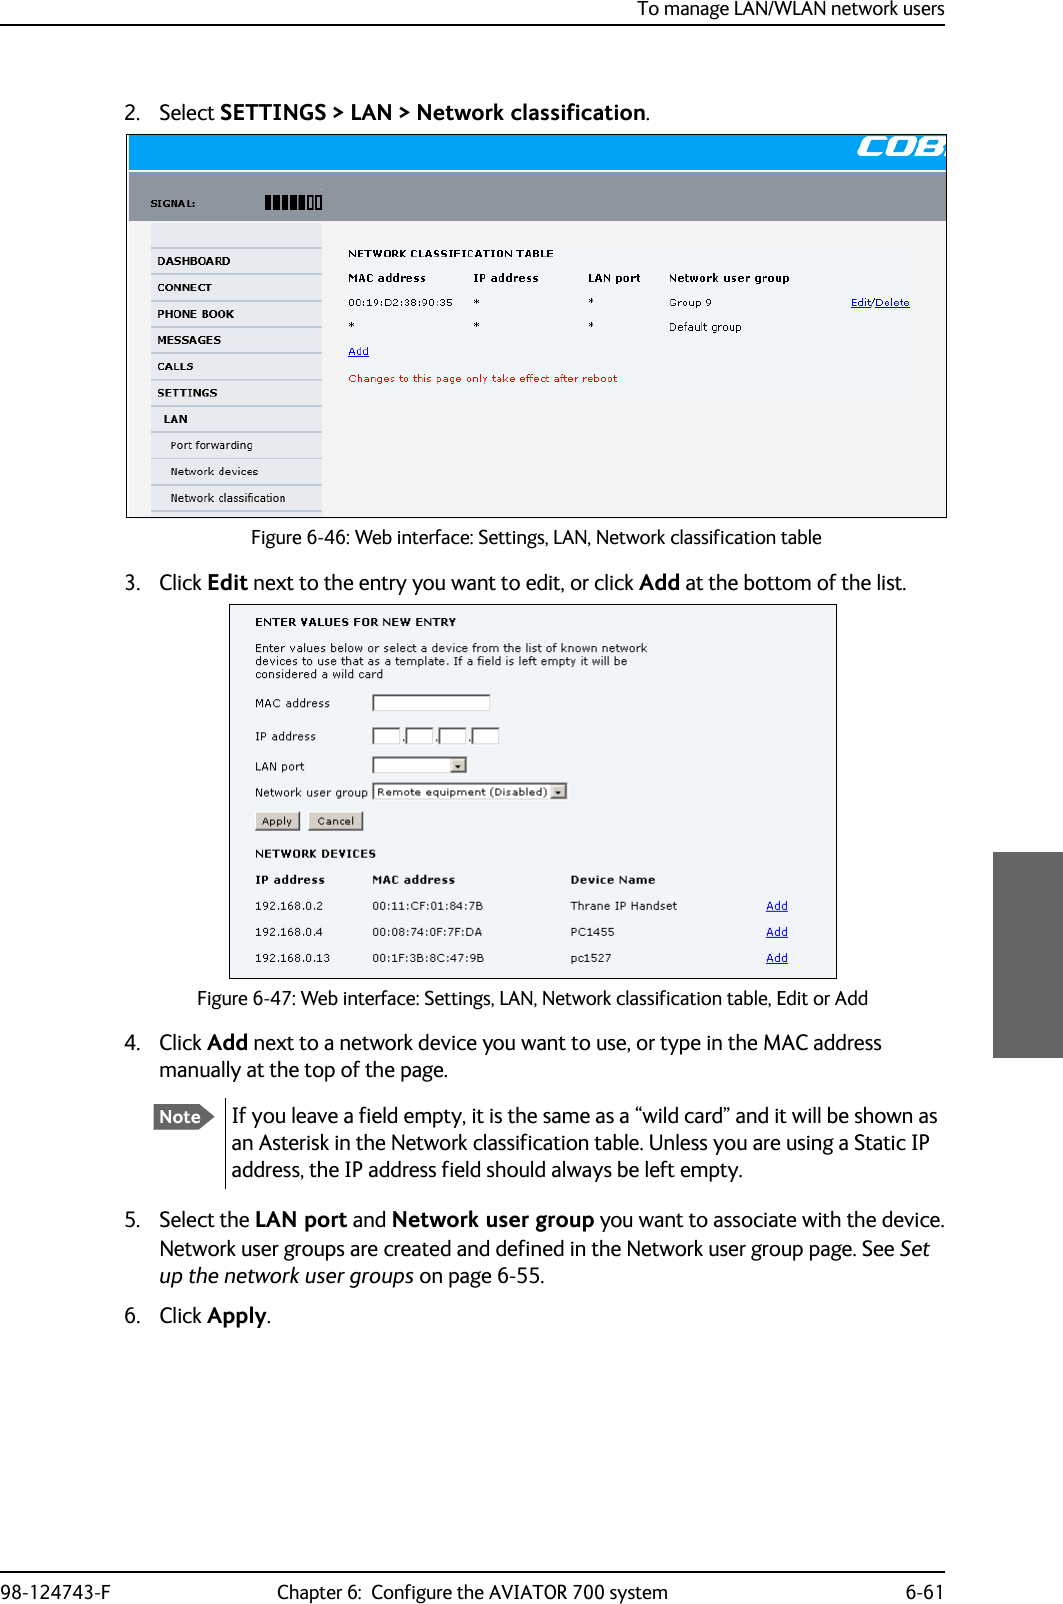 To manage LAN/WLAN network users98-124743-F Chapter 6:  Configure the AVIATOR 700 system 6-612. Select SETTINGS &gt; LAN &gt; Network classification.Figure 6-46: Web interface: Settings, LAN, Network classification table3. Click Edit next to the entry you want to edit, or click Add at the bottom of the list.Figure 6-47: Web interface: Settings, LAN, Network classification table, Edit or Add4. Click Add next to a network device you want to use, or type in the MAC address manually at the top of the page.If you leave a field empty, it is the same as a “wild card” and it will be shown as an Asterisk in the Network classification table. Unless you are using a Static IP address, the IP address field should always be left empty.5. Select the LAN port and Network user group you want to associate with the device.Network user groups are created and defined in the Network user group page. See Set up the network user groups on page 6-55.6. Click Apply.Note